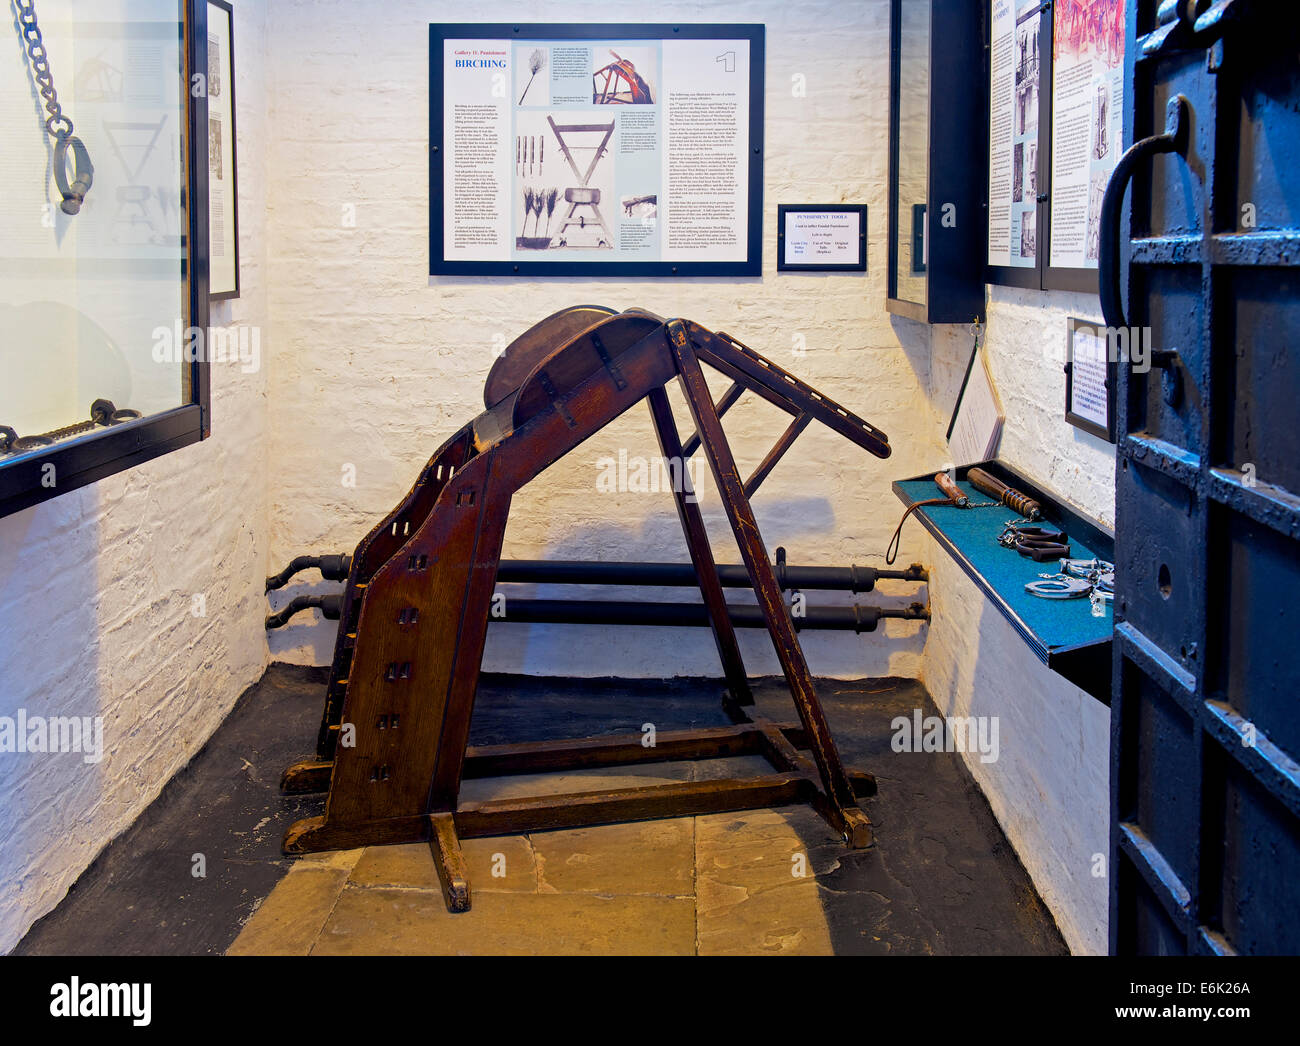 Exhibit in the Prison and Police Museum, Ripon, North Yorkshire, England UK Stock Photo